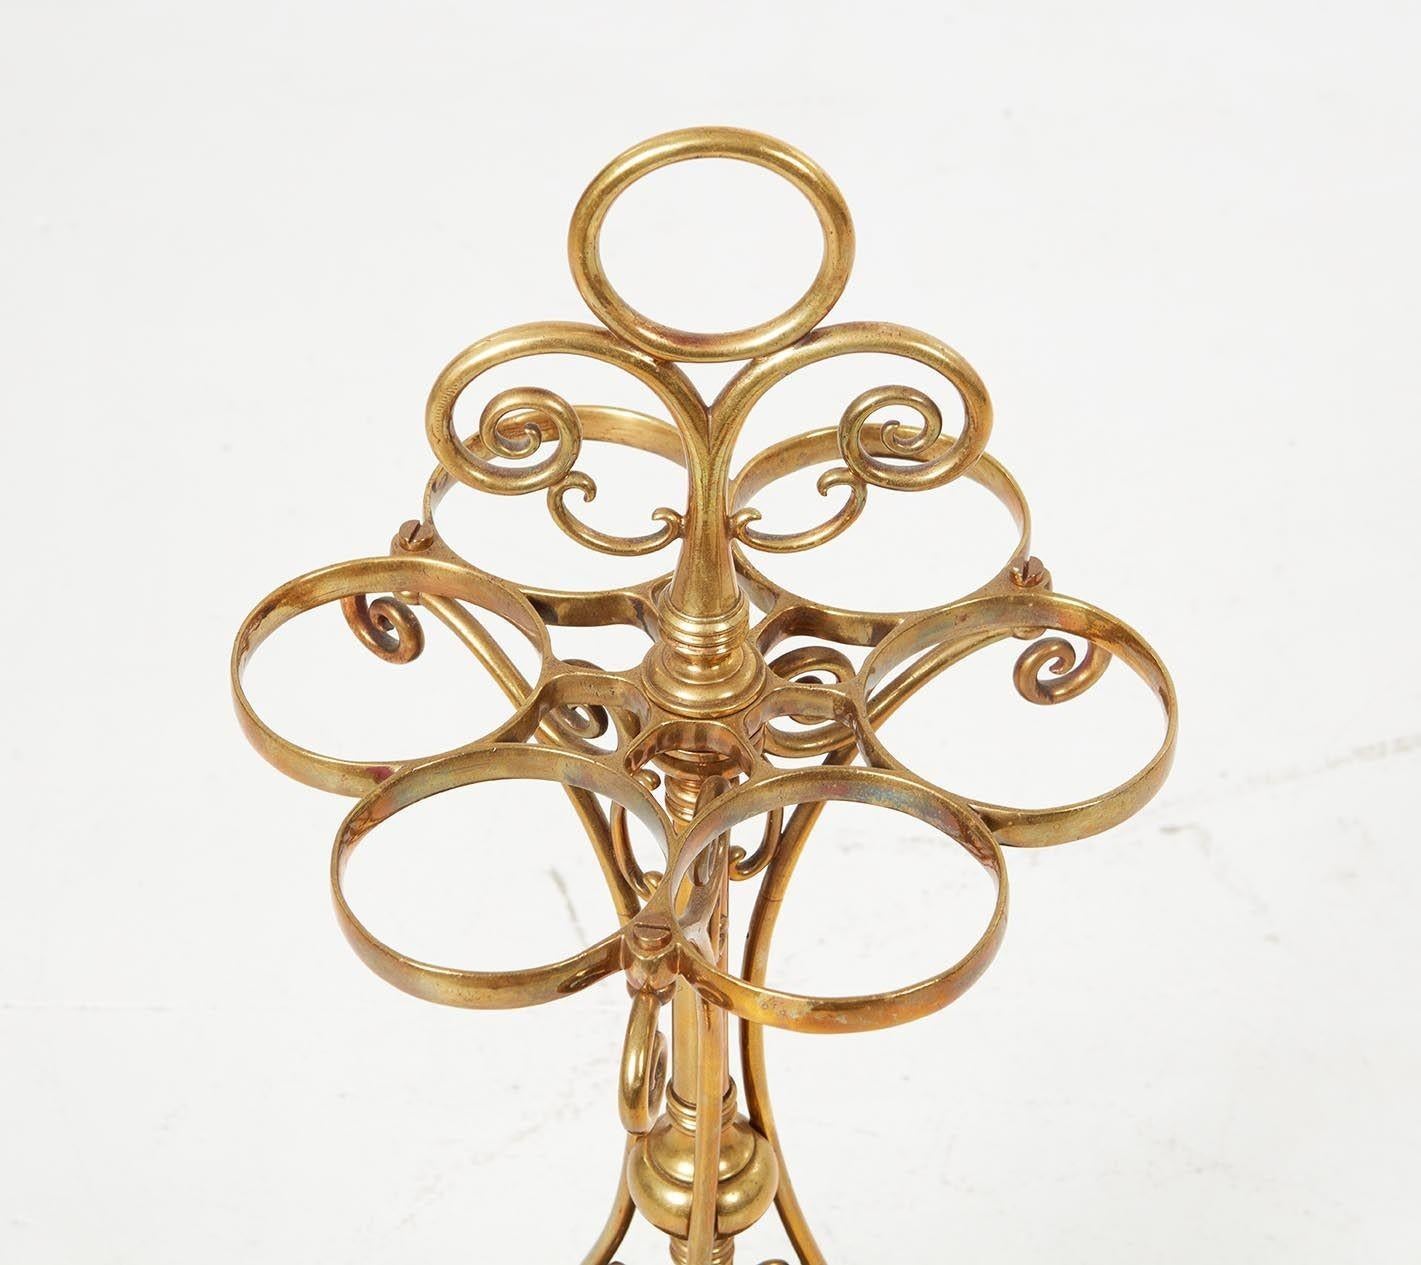 A scrollwork brass umbrella and/or walking-stick stand with ringed holders around a central shaft and three scrolled brackets surmounted by a conforming ring and top handle and ending in a heavy brass base with three sectional iron drip pan inserts.